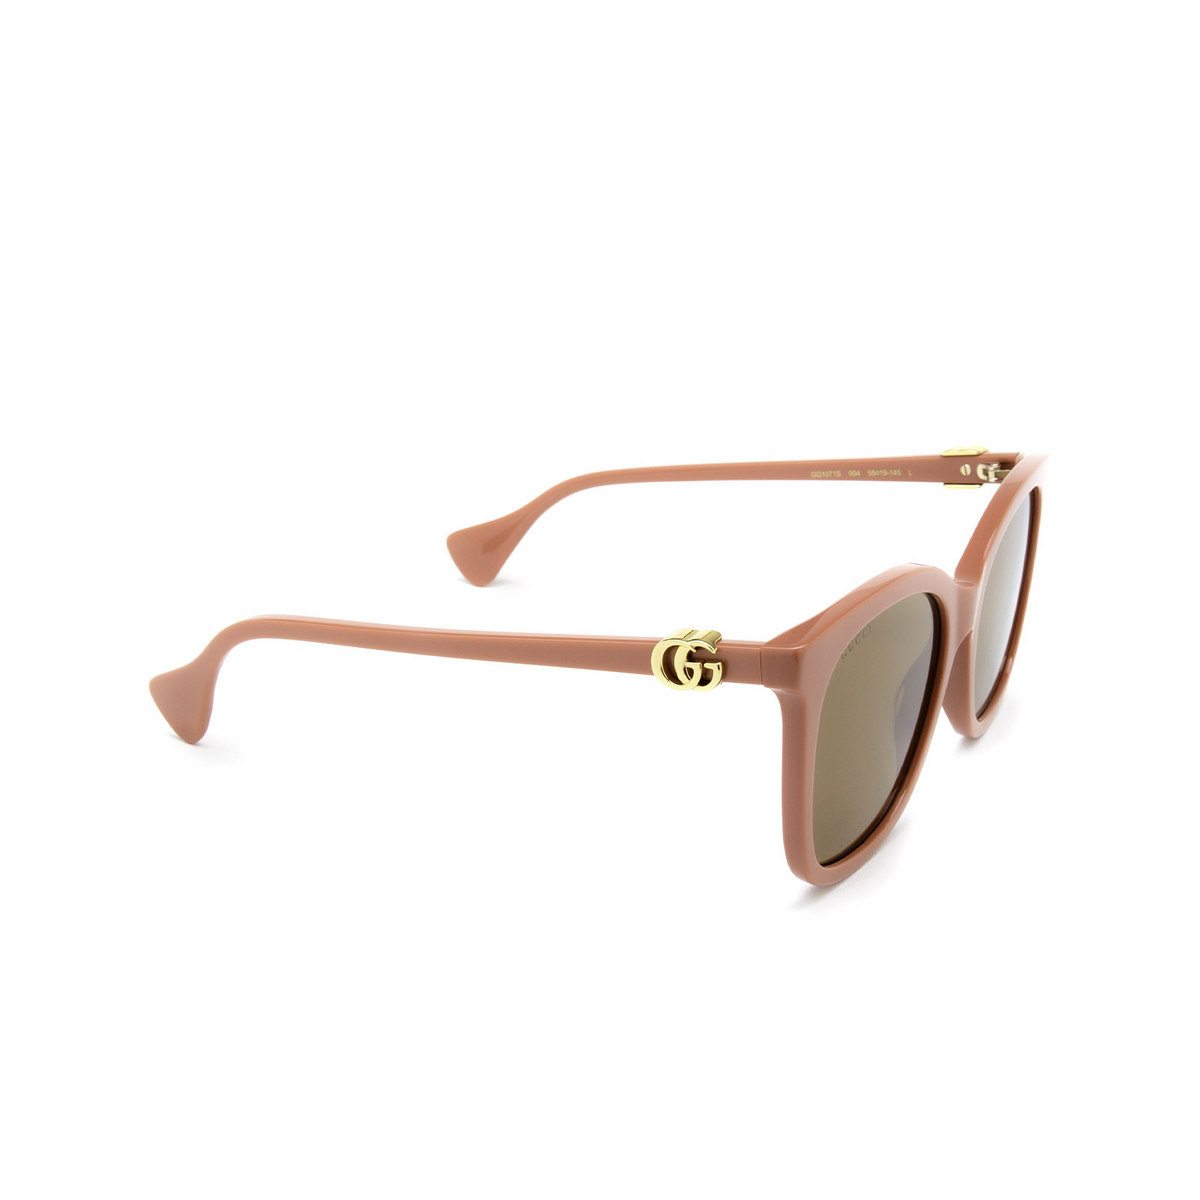 Gucci® Cat-eye Sunglasses: GG1071S color Pink 004 - three-quarters view.